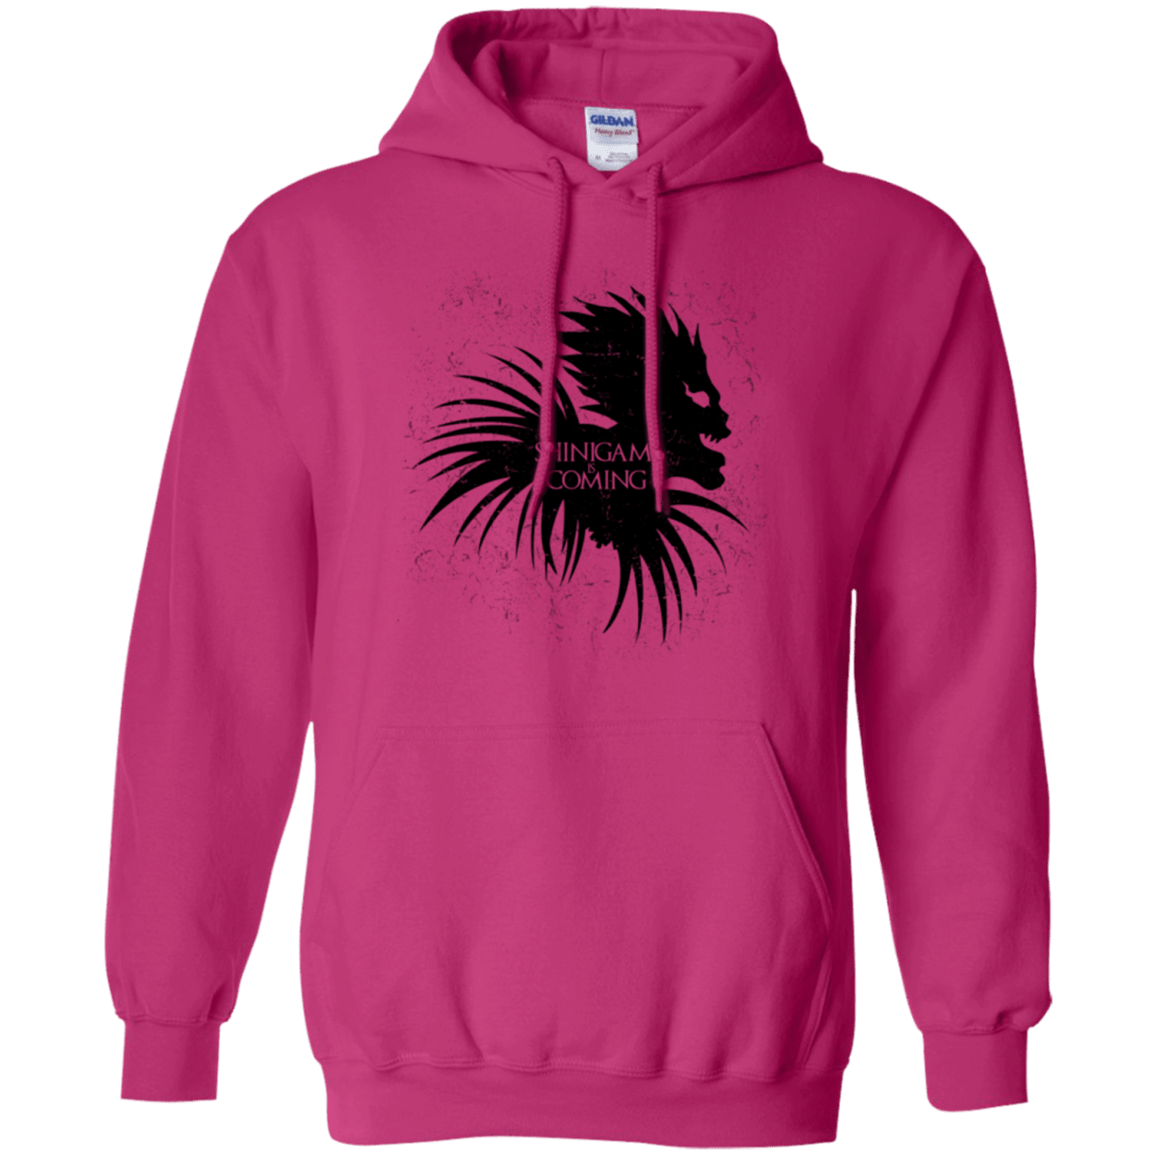 Shinigami Is Coming Pullover Hoodie